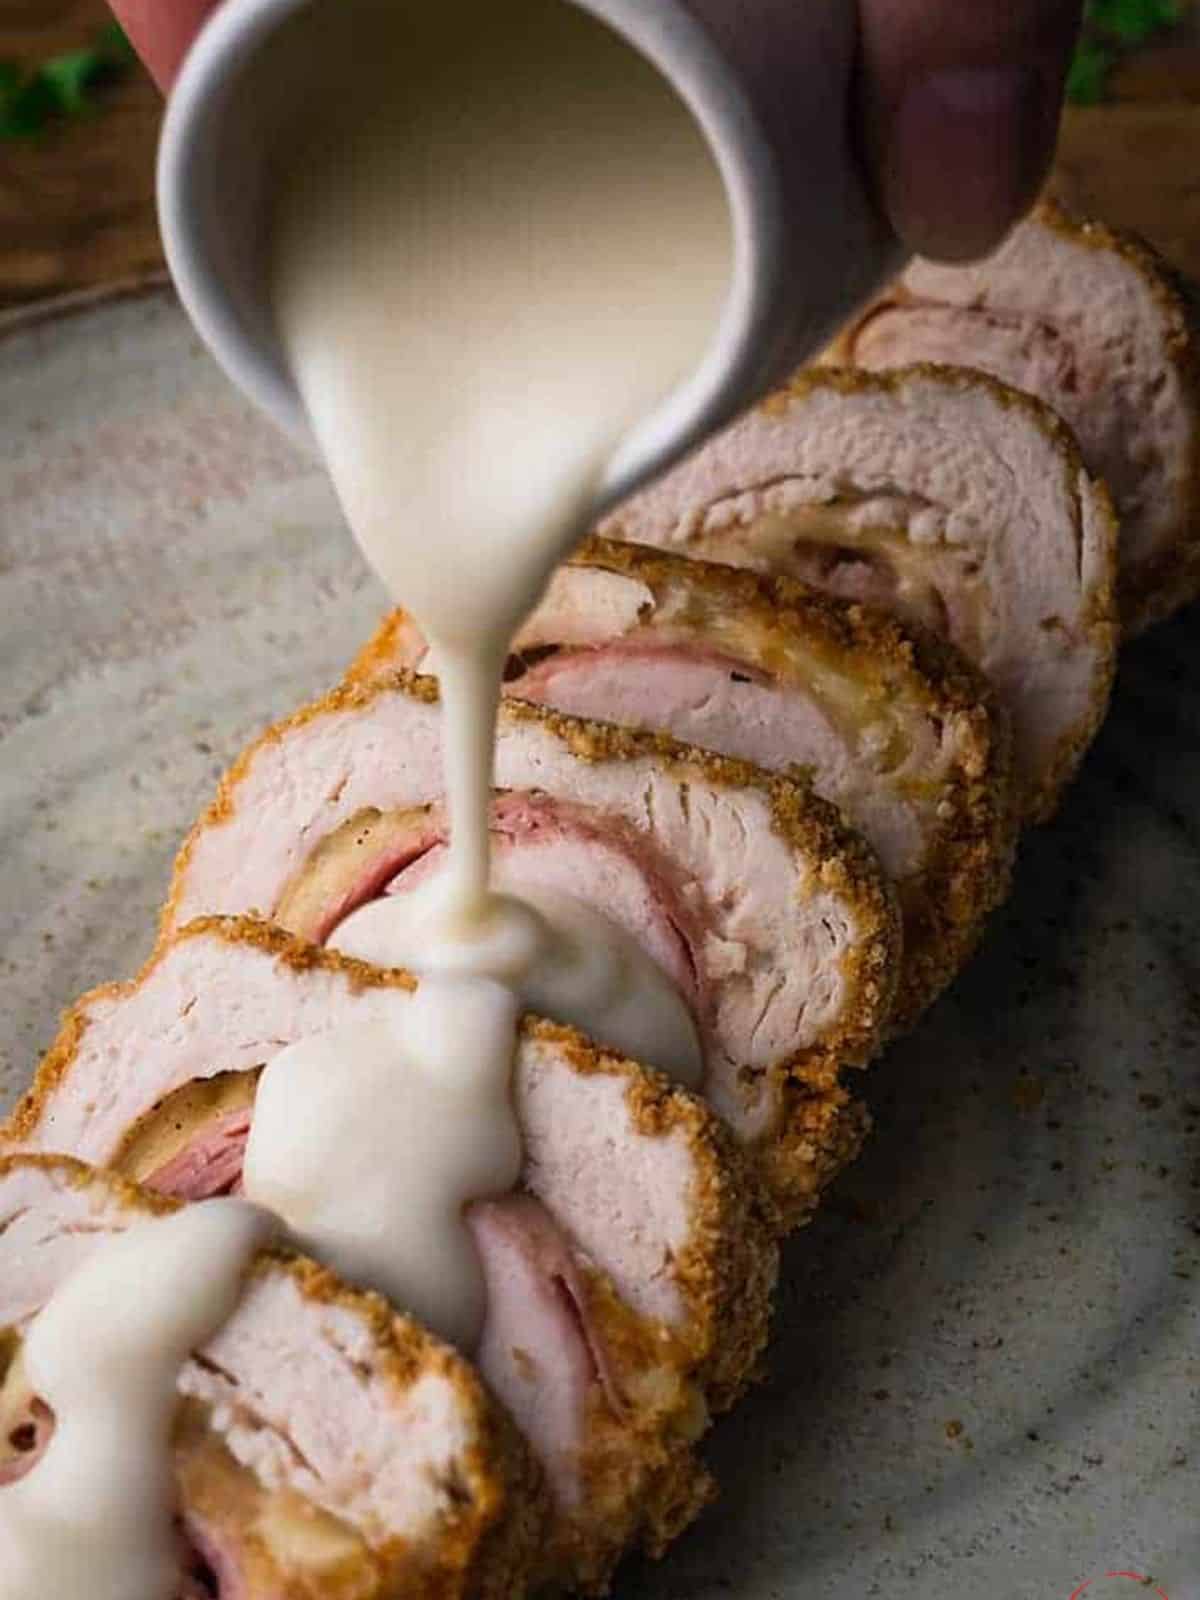 White parmesan sauce being poured over sliced chicken.